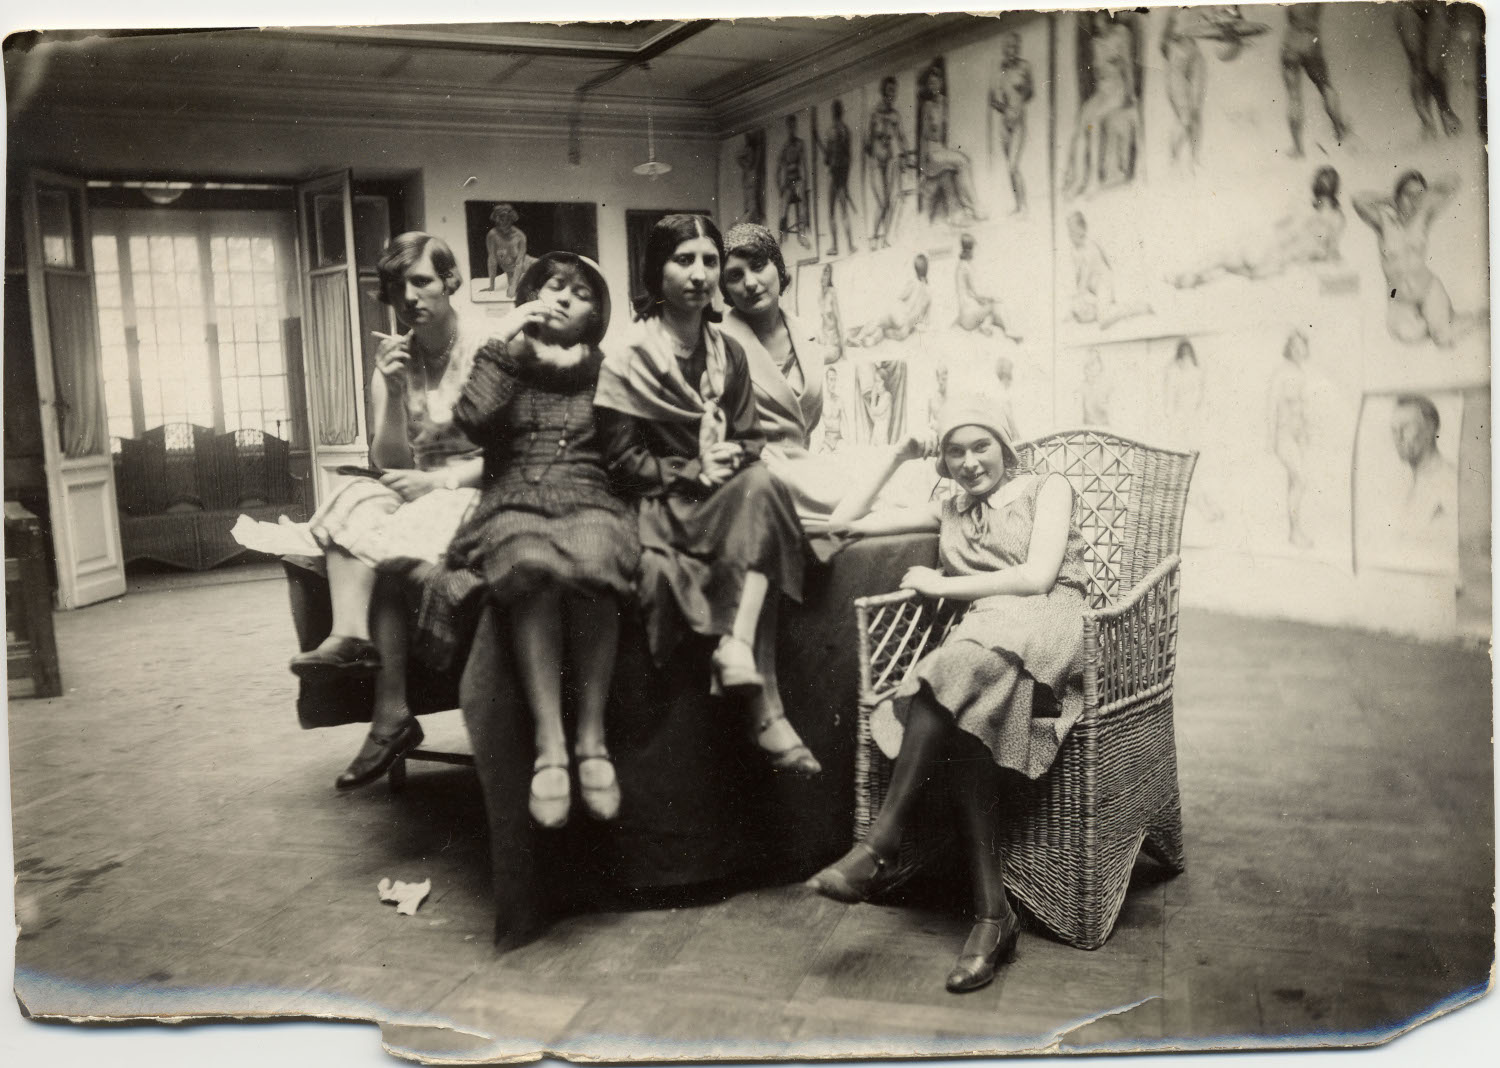 How to Become an Artist in Interwar Warsaw. Examining the Emerging Artistic Careers of Three Jewish Women: Mary Litauer, Bella Natanson and Resia Schor - AWARE